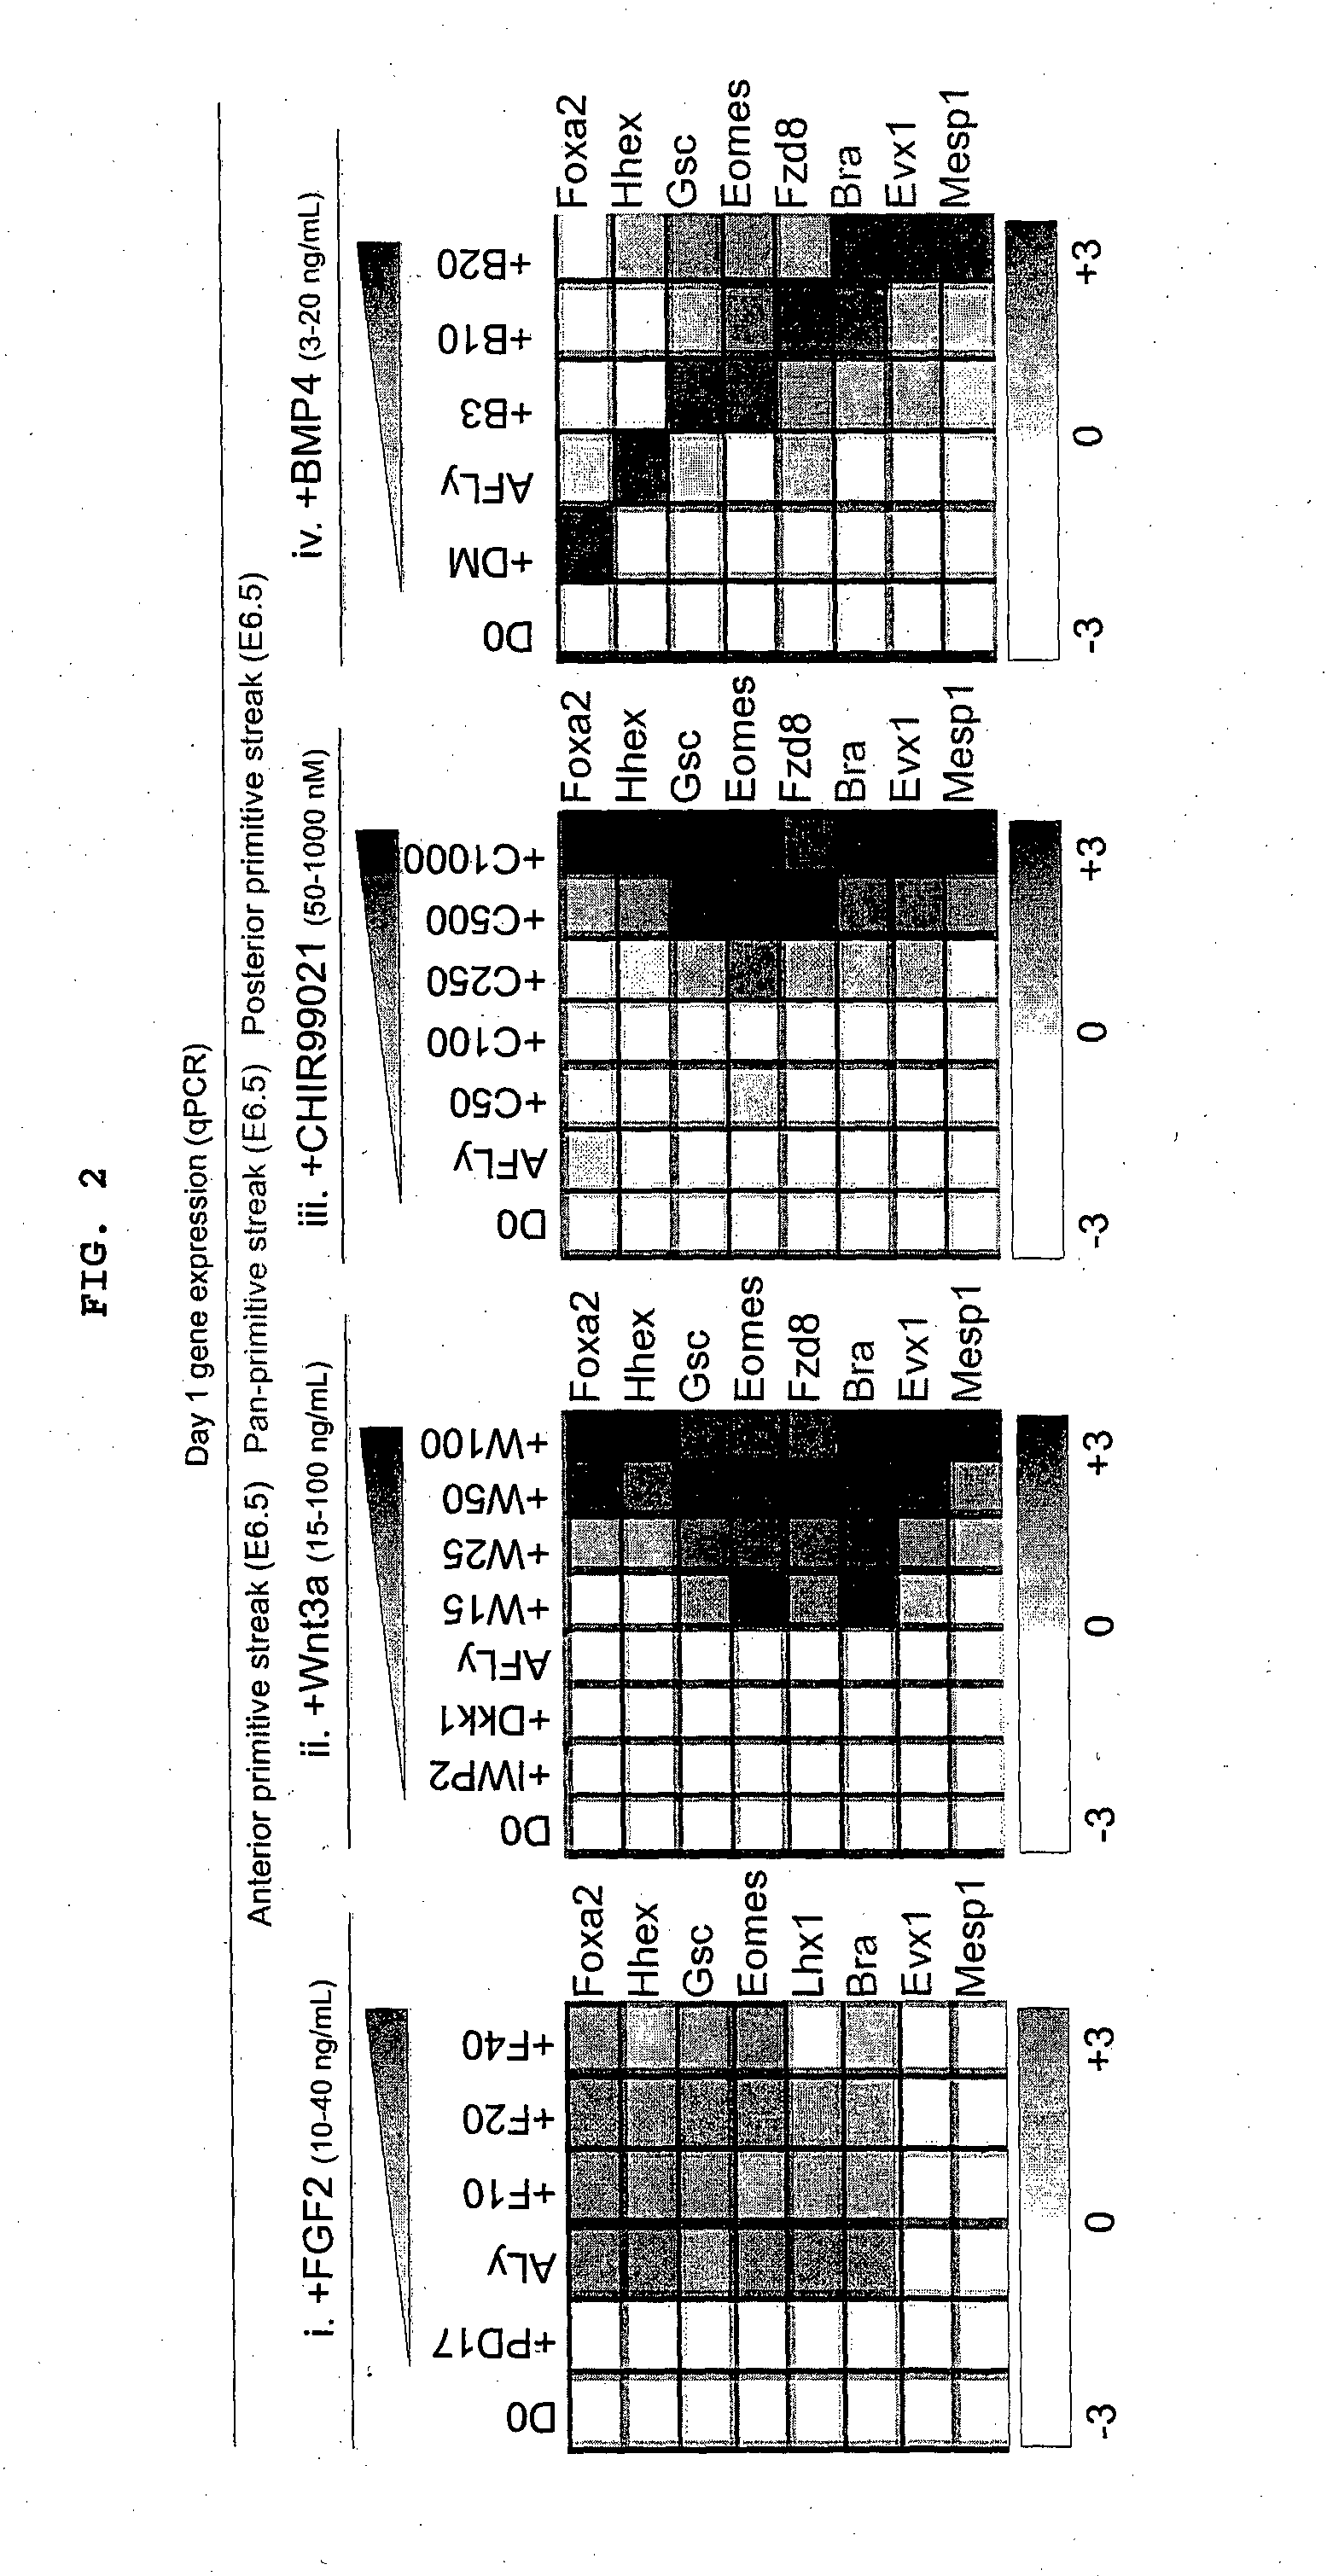 Methods of differentiating stem cells into one or more cell lineages